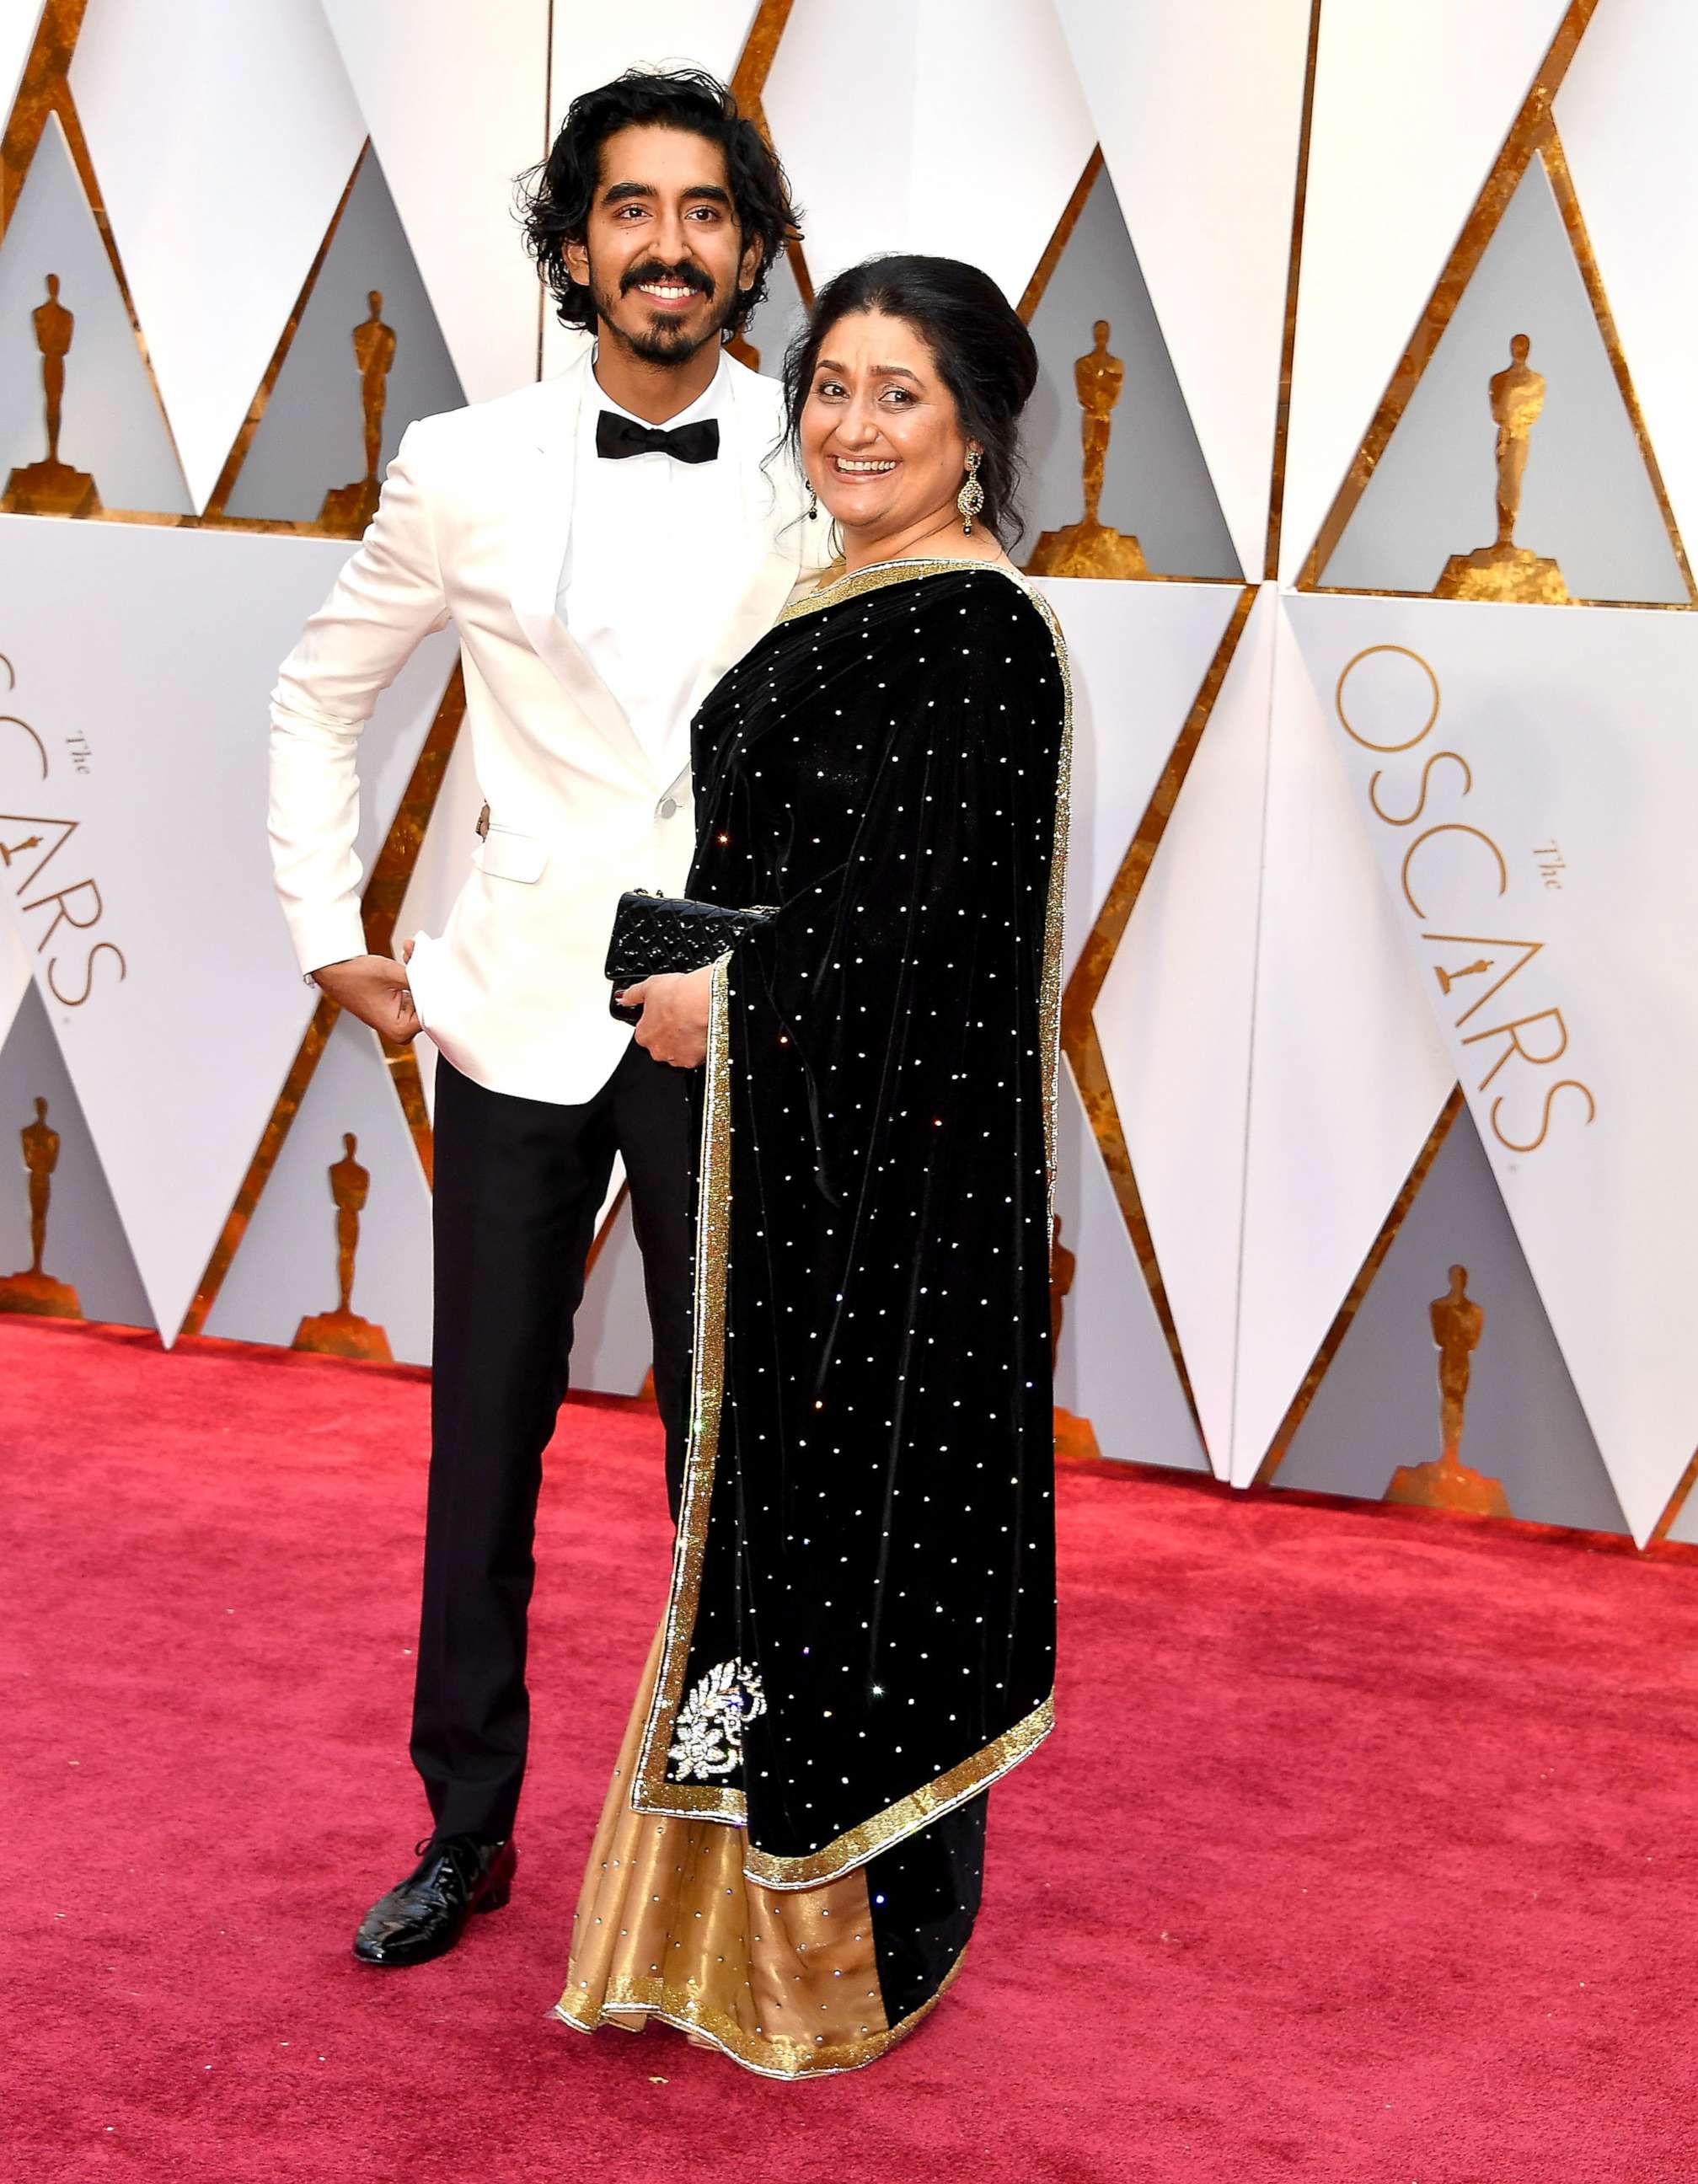 PHOTO: Dev Patel and Anita Patel arrive at the 89th annual Academy Awards.